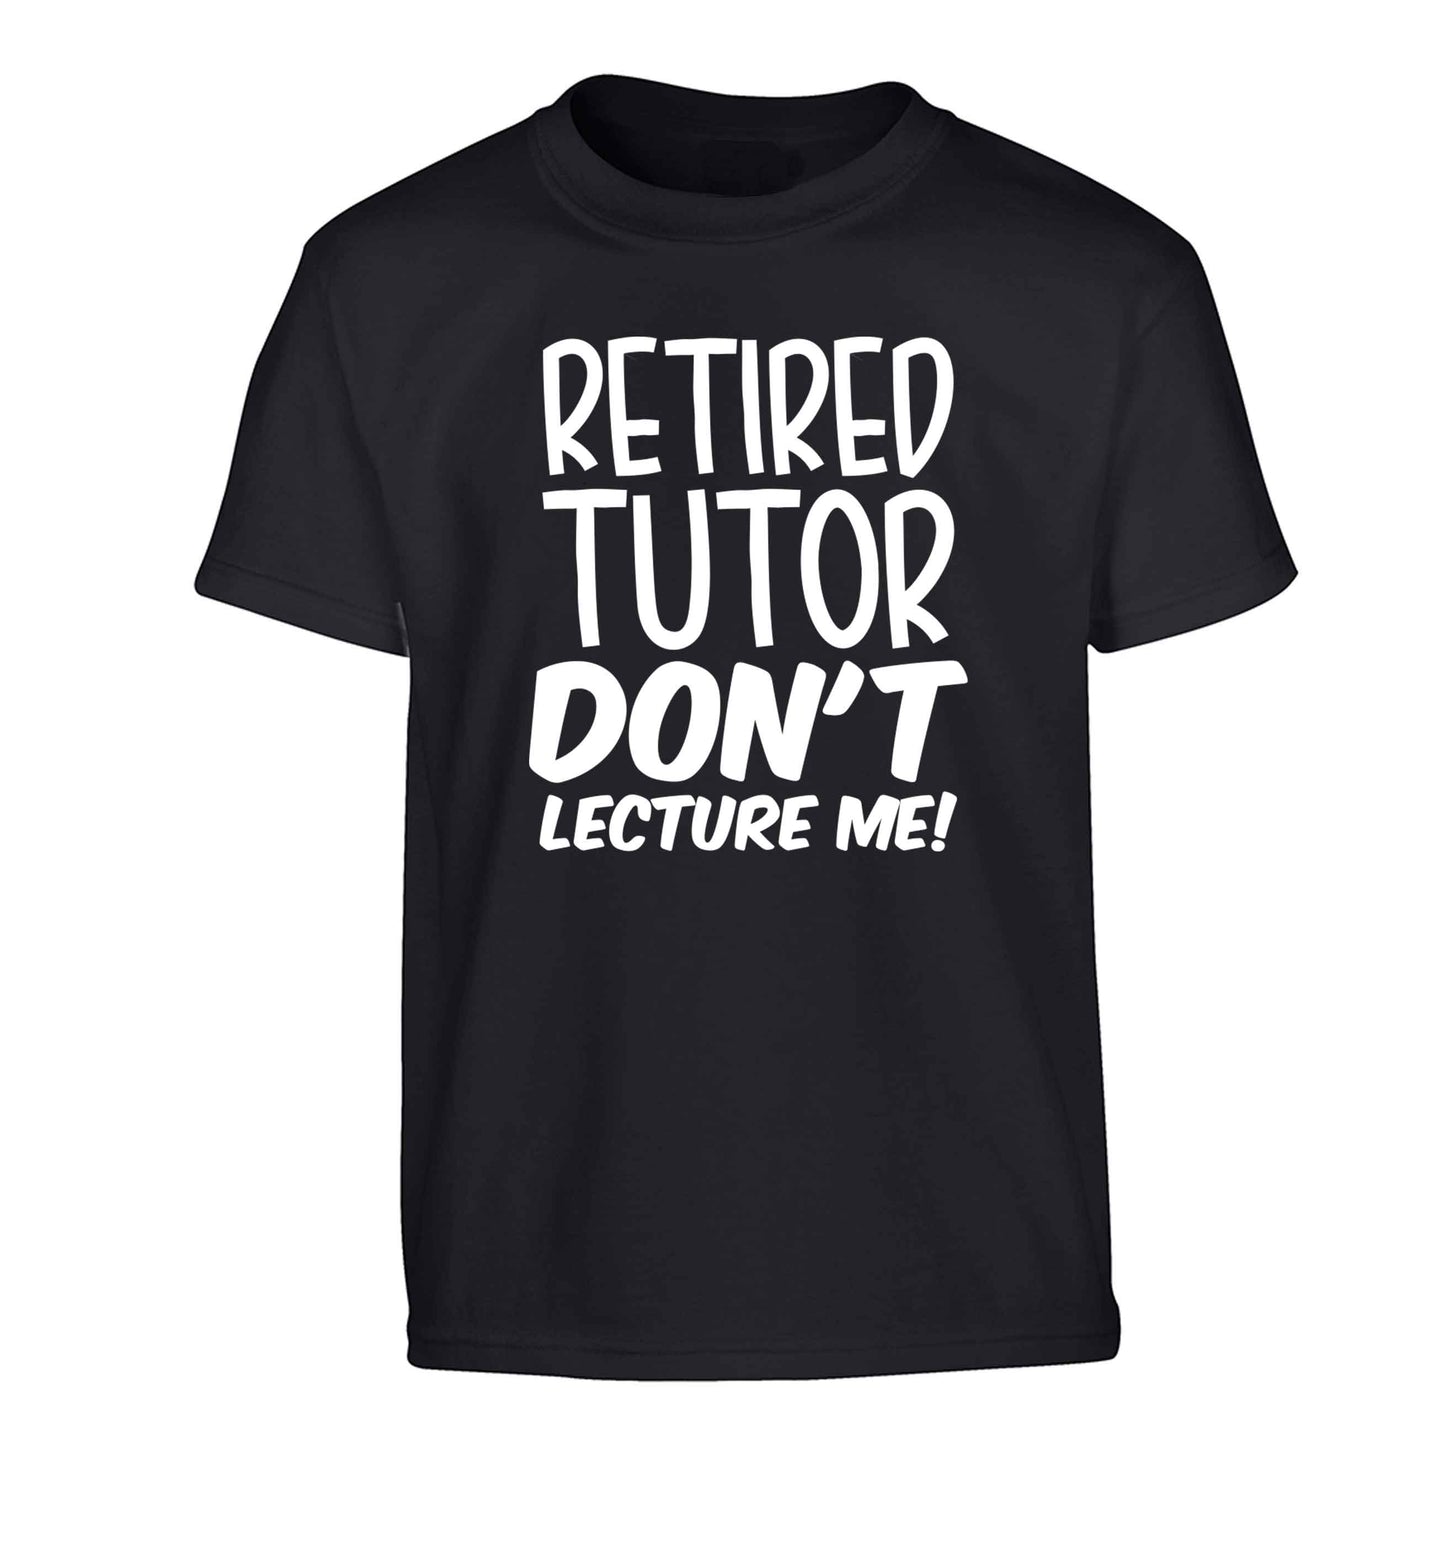 Retired tutor don't lecture me! Children's black Tshirt 12-13 Years